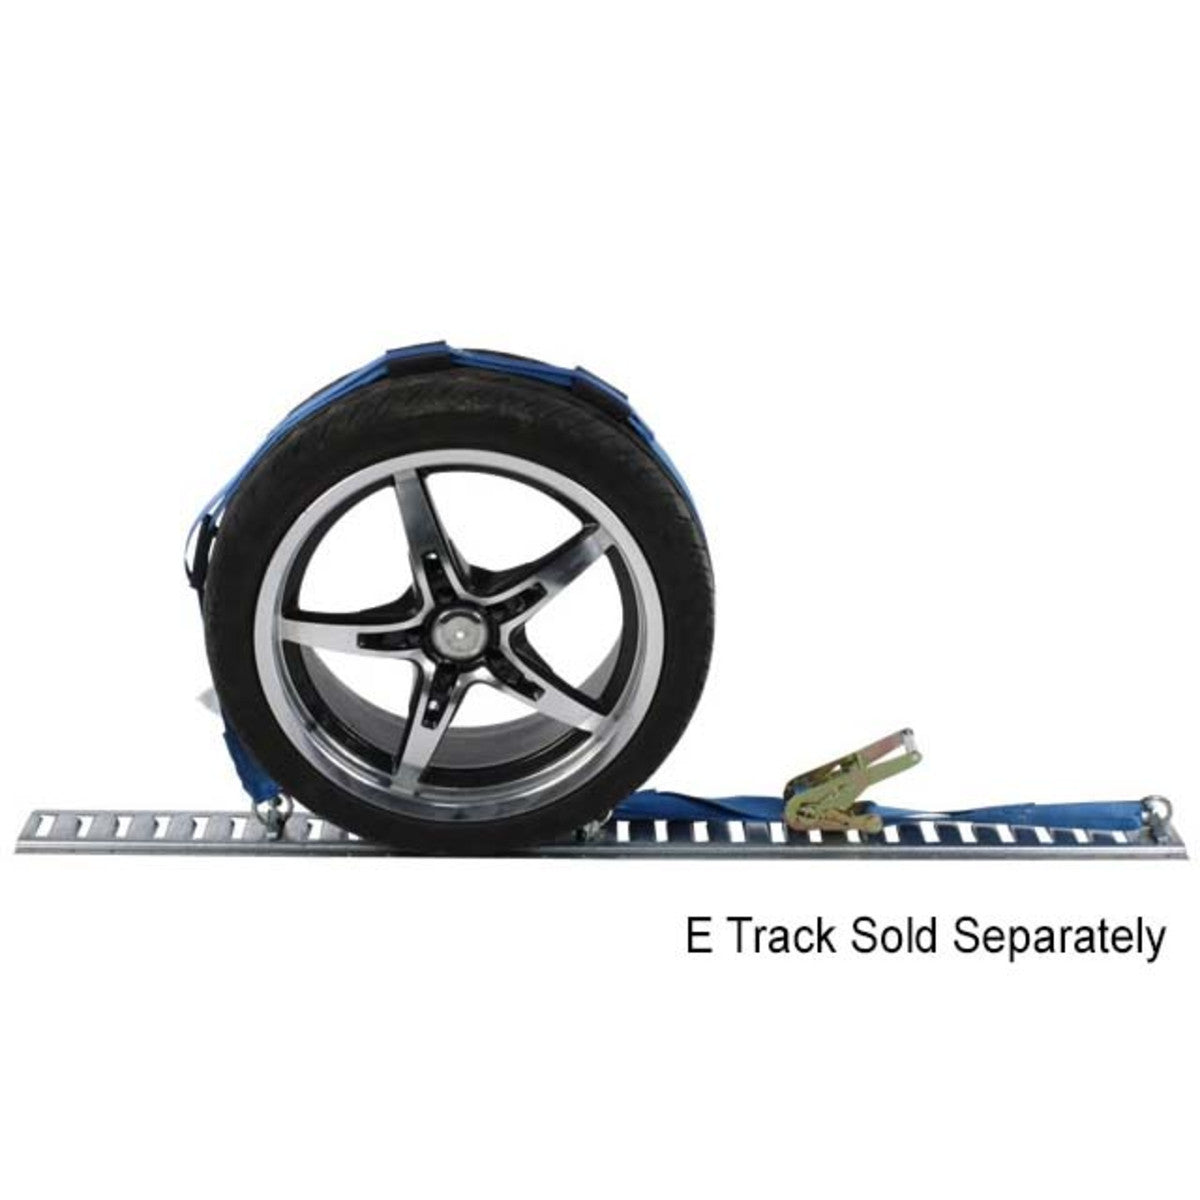 Wheel Strap with Etrack Fittings & 3 Rubber Blocks 4 Pack image 2 of 8